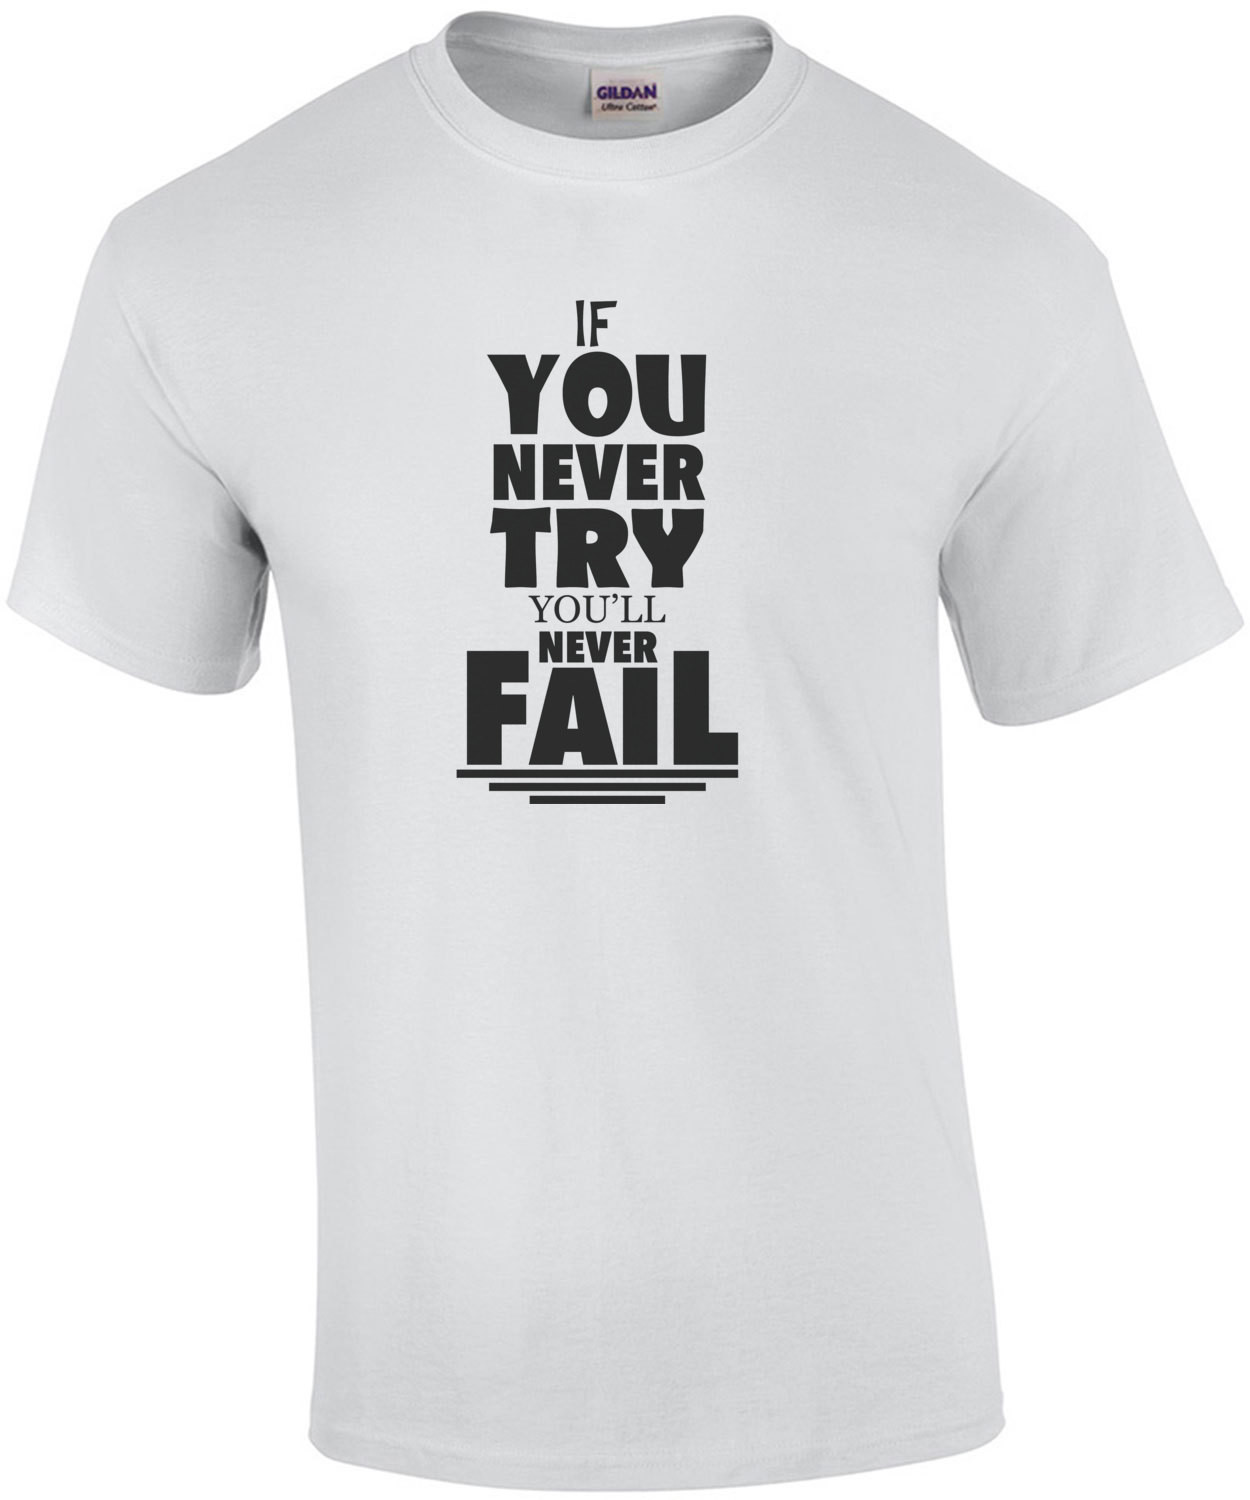 If you never try you'll never fail - sarcastic t-shirt